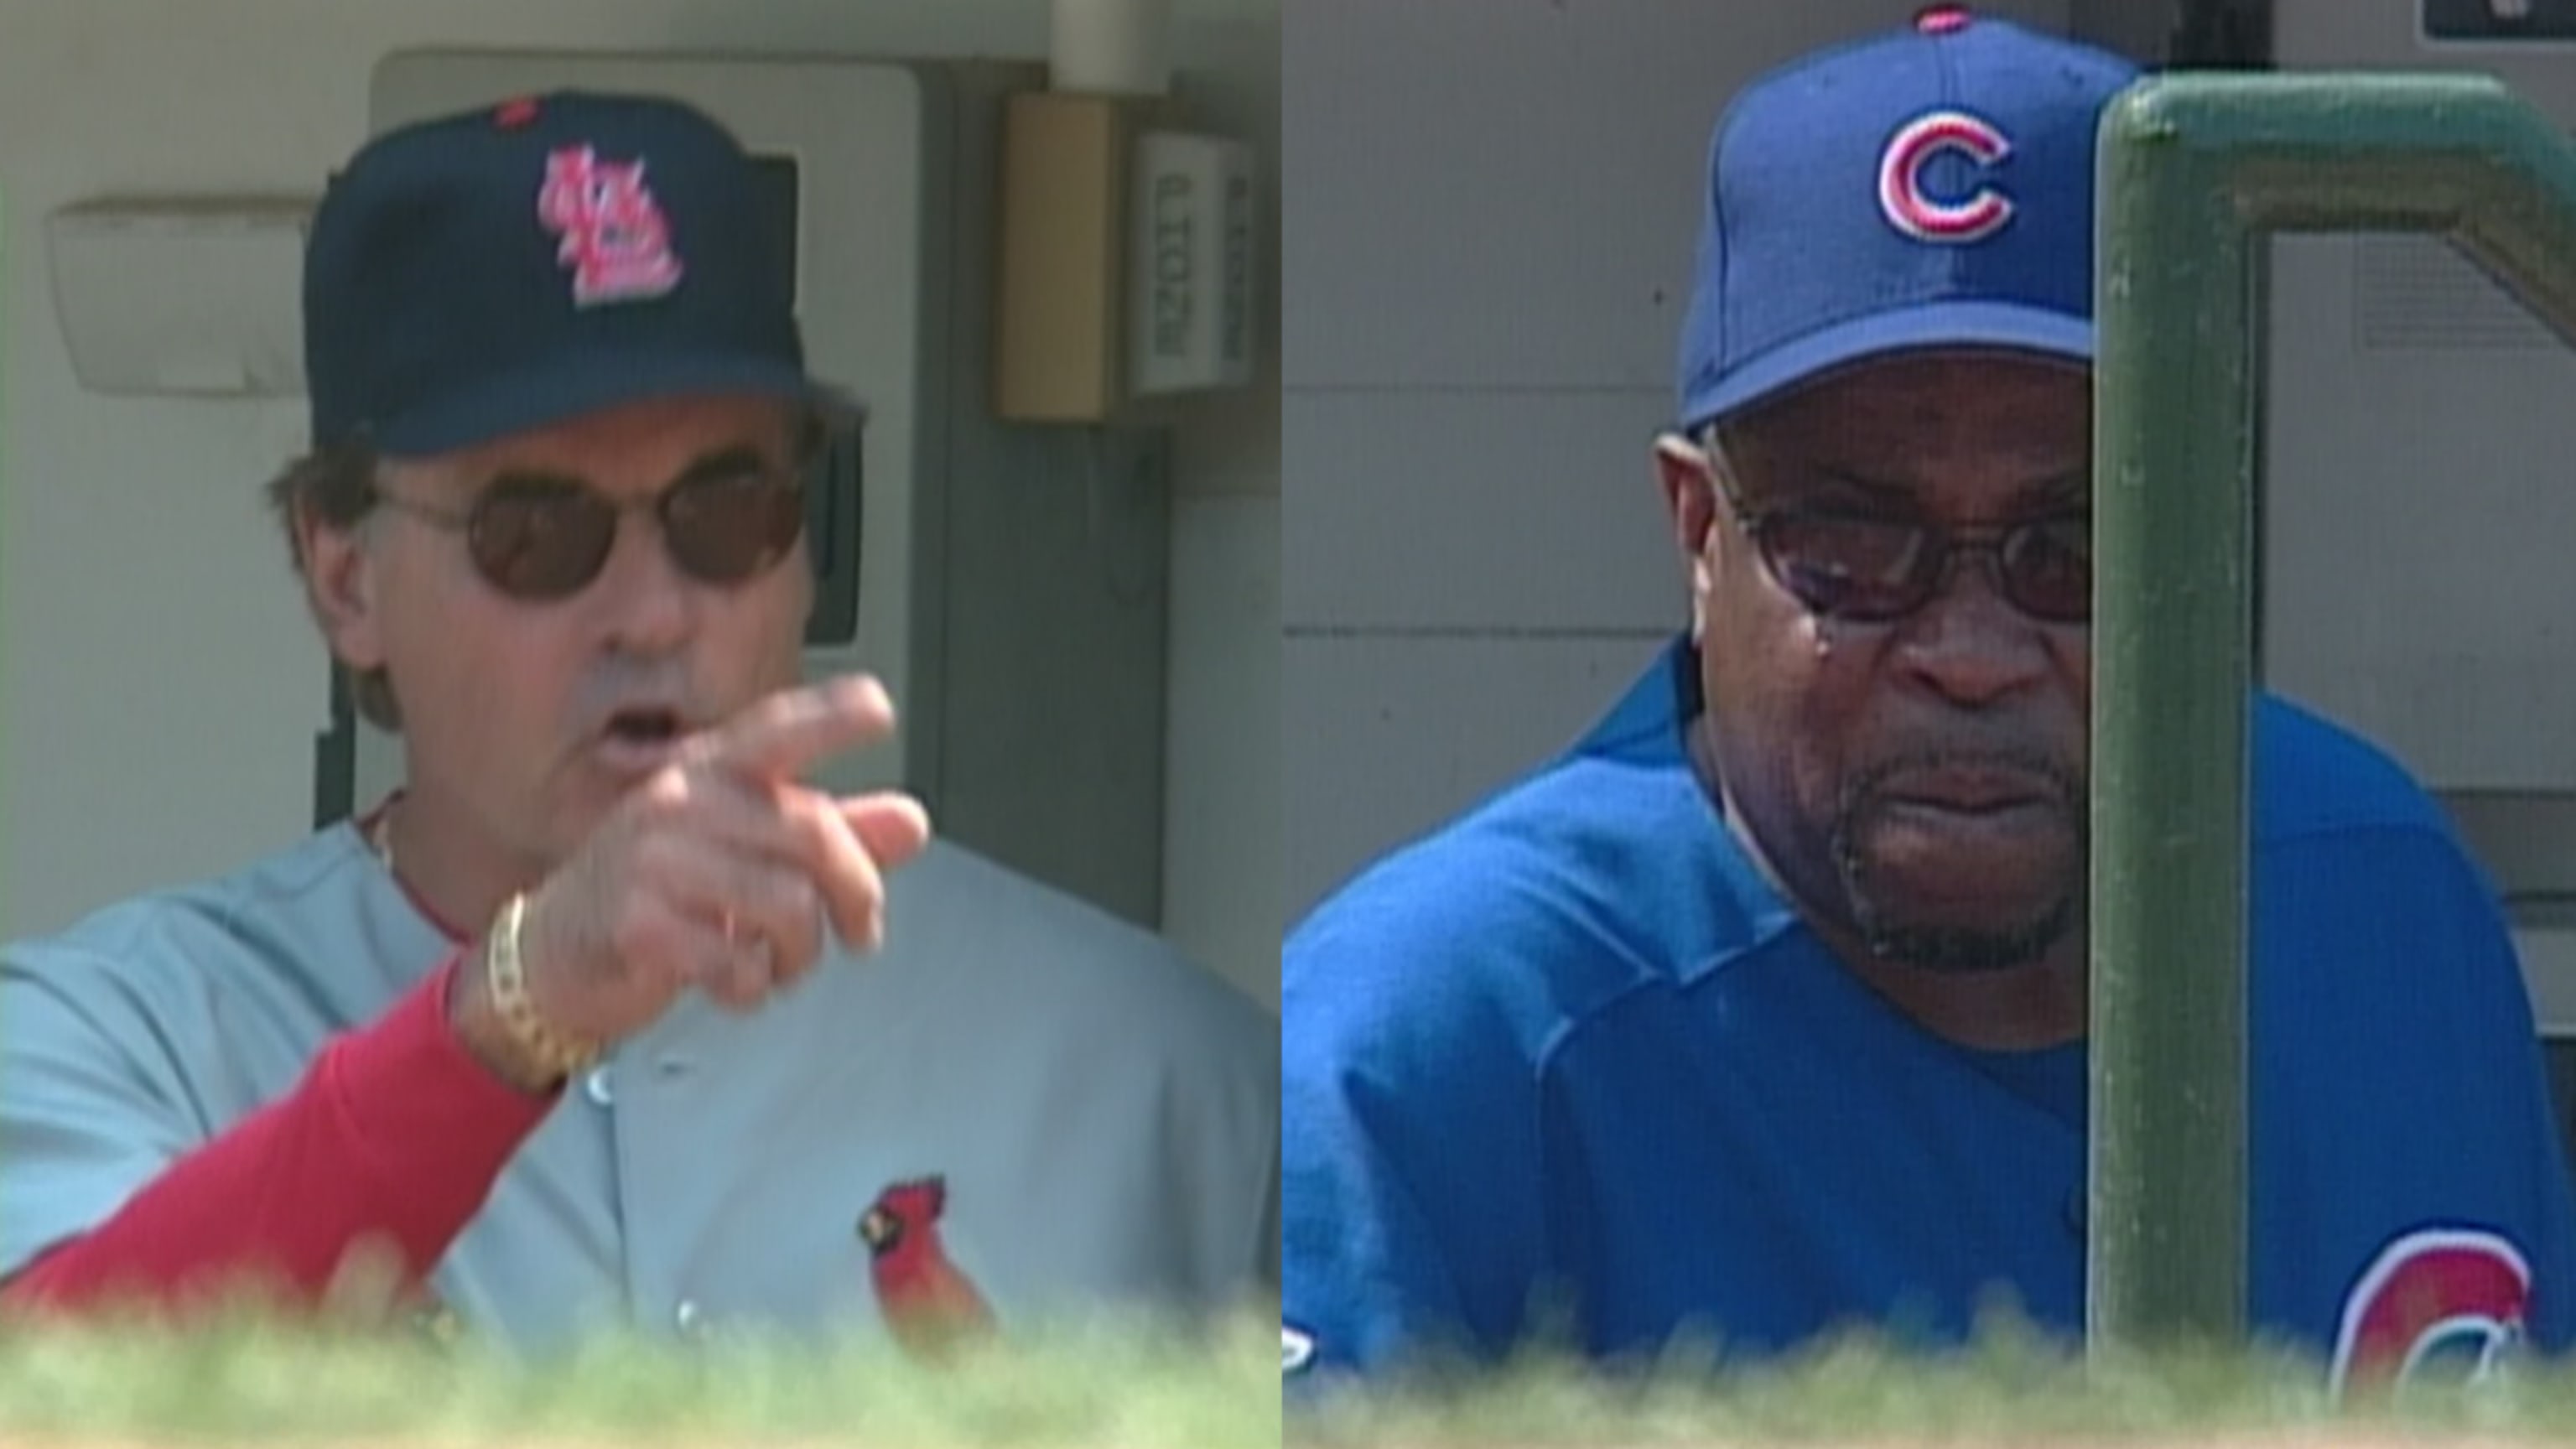 The one game Dusty Baker, Tony La Russa played in as teammates